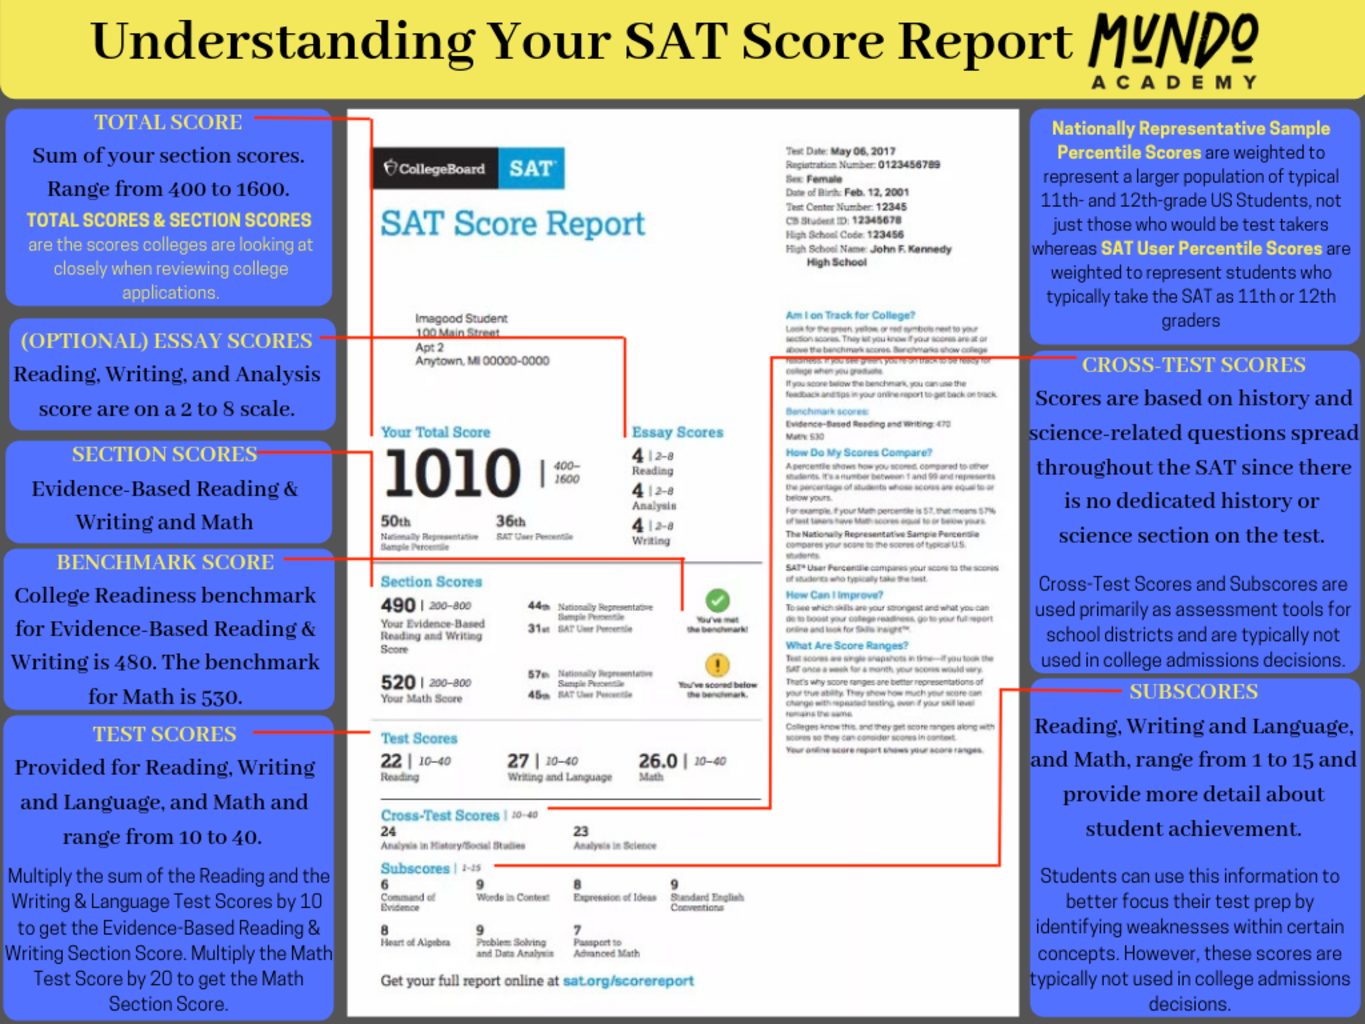 Understanding Your SAT Score Report. Our blog also helps students understand how to use the score report to their benefit, including next steps. Our handout describes the important aspects of the score report.